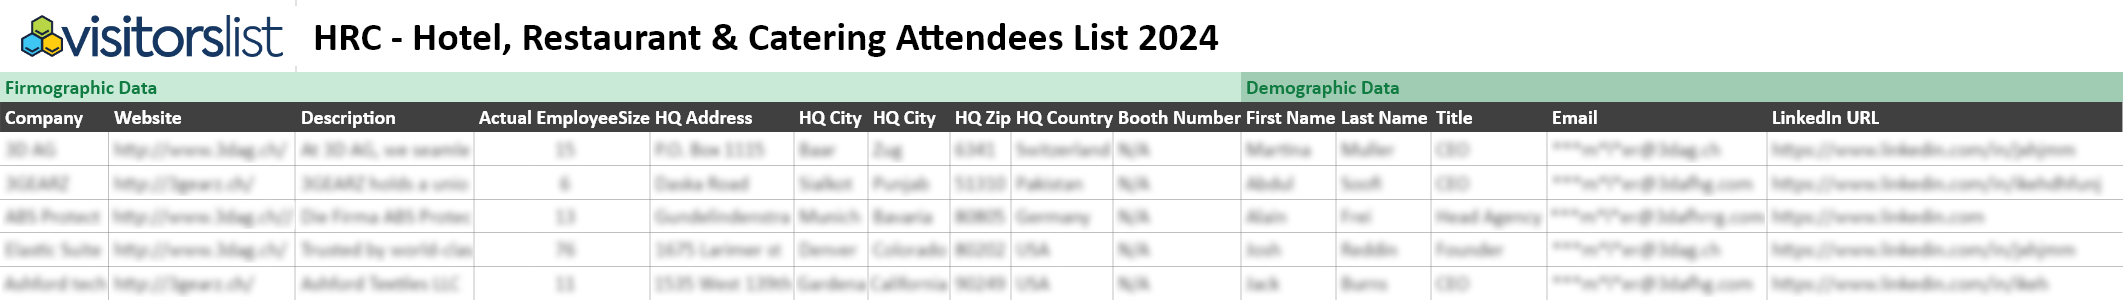 HRC - Hotel, Restaurant & Catering Attendees List 2024